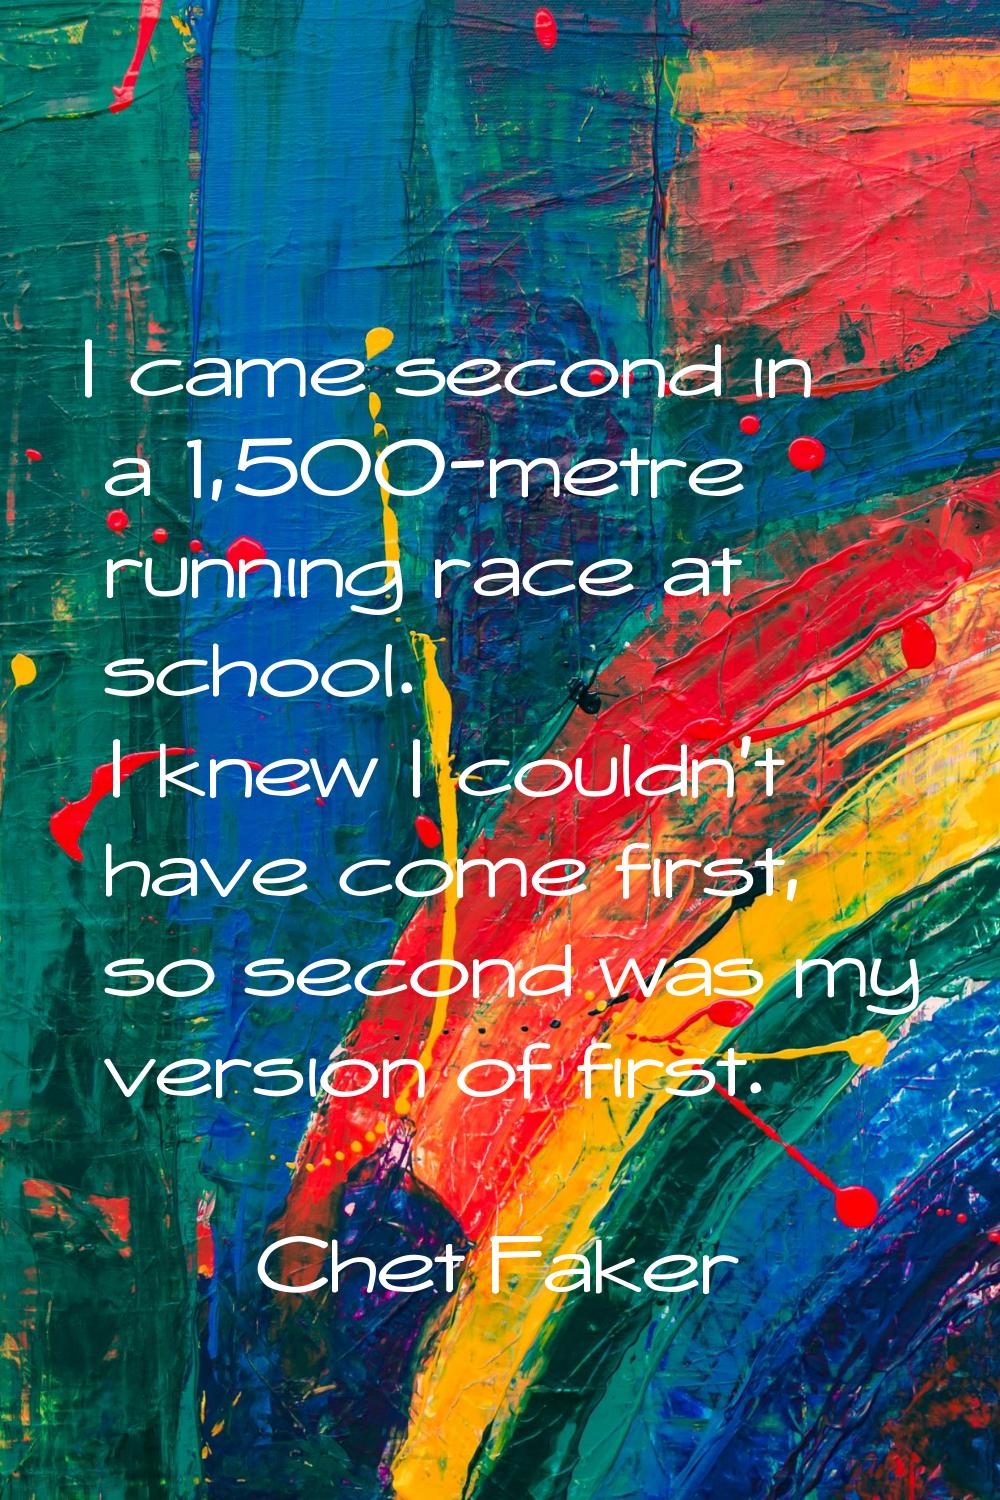 I came second in a 1,500-metre running race at school. I knew I couldn't have come first, so second